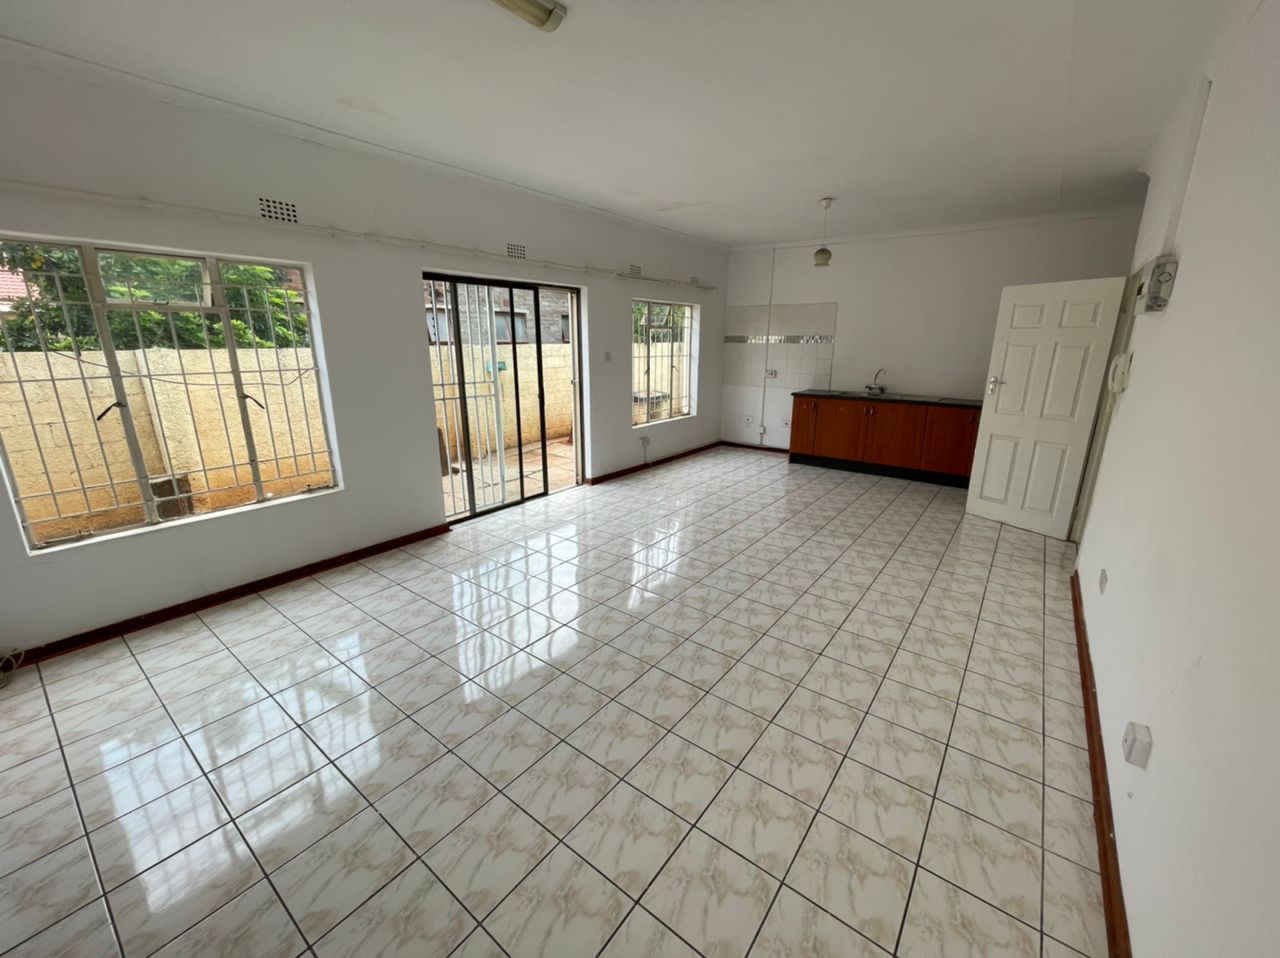 Apartment for Rent in safe location of Gaborone